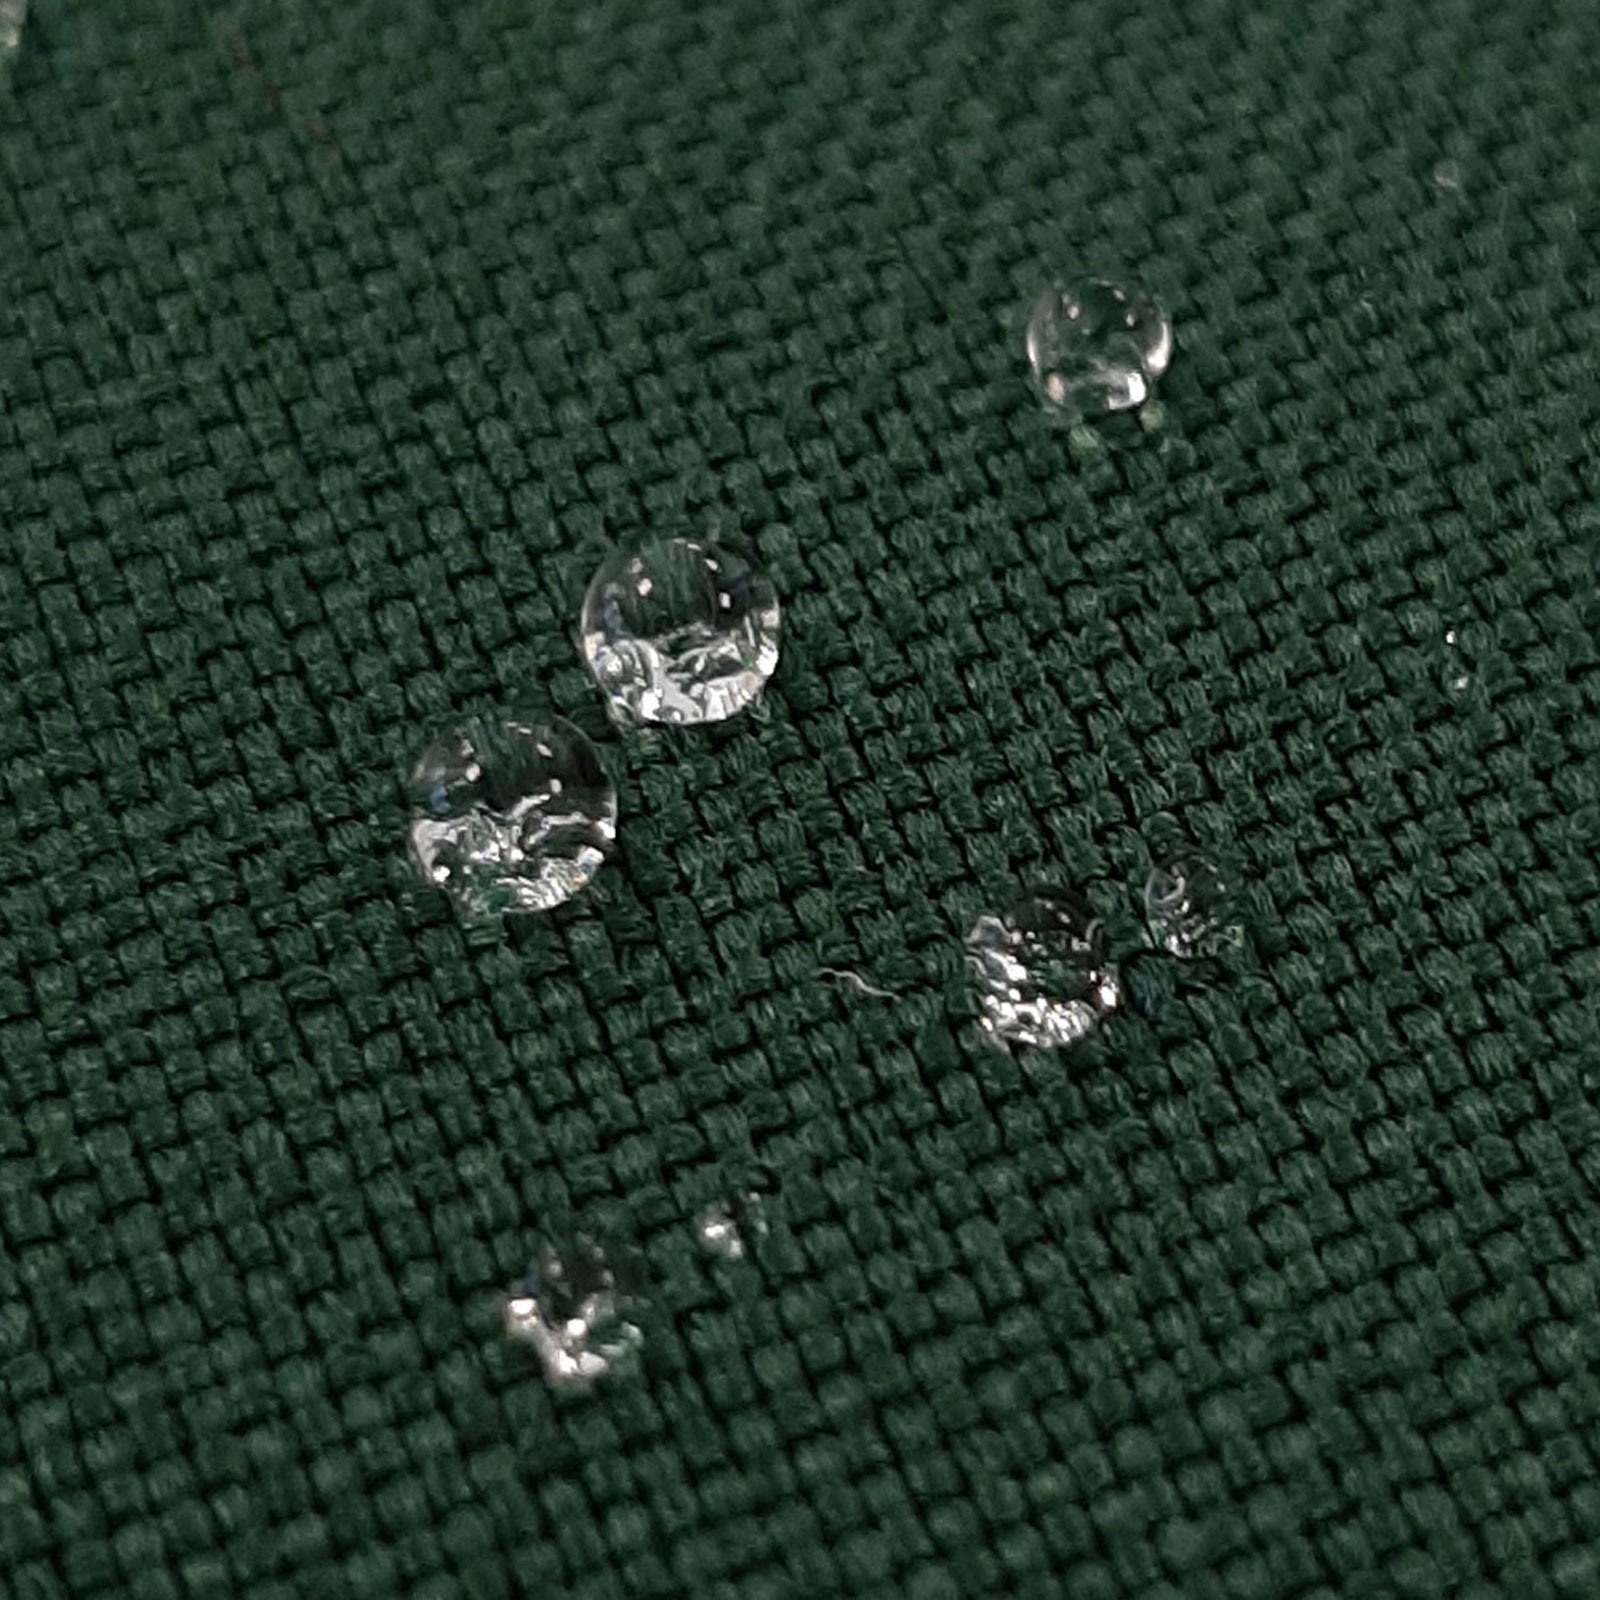 Outdoor fabric Florida with PE coating (high light fastness values) - dark green